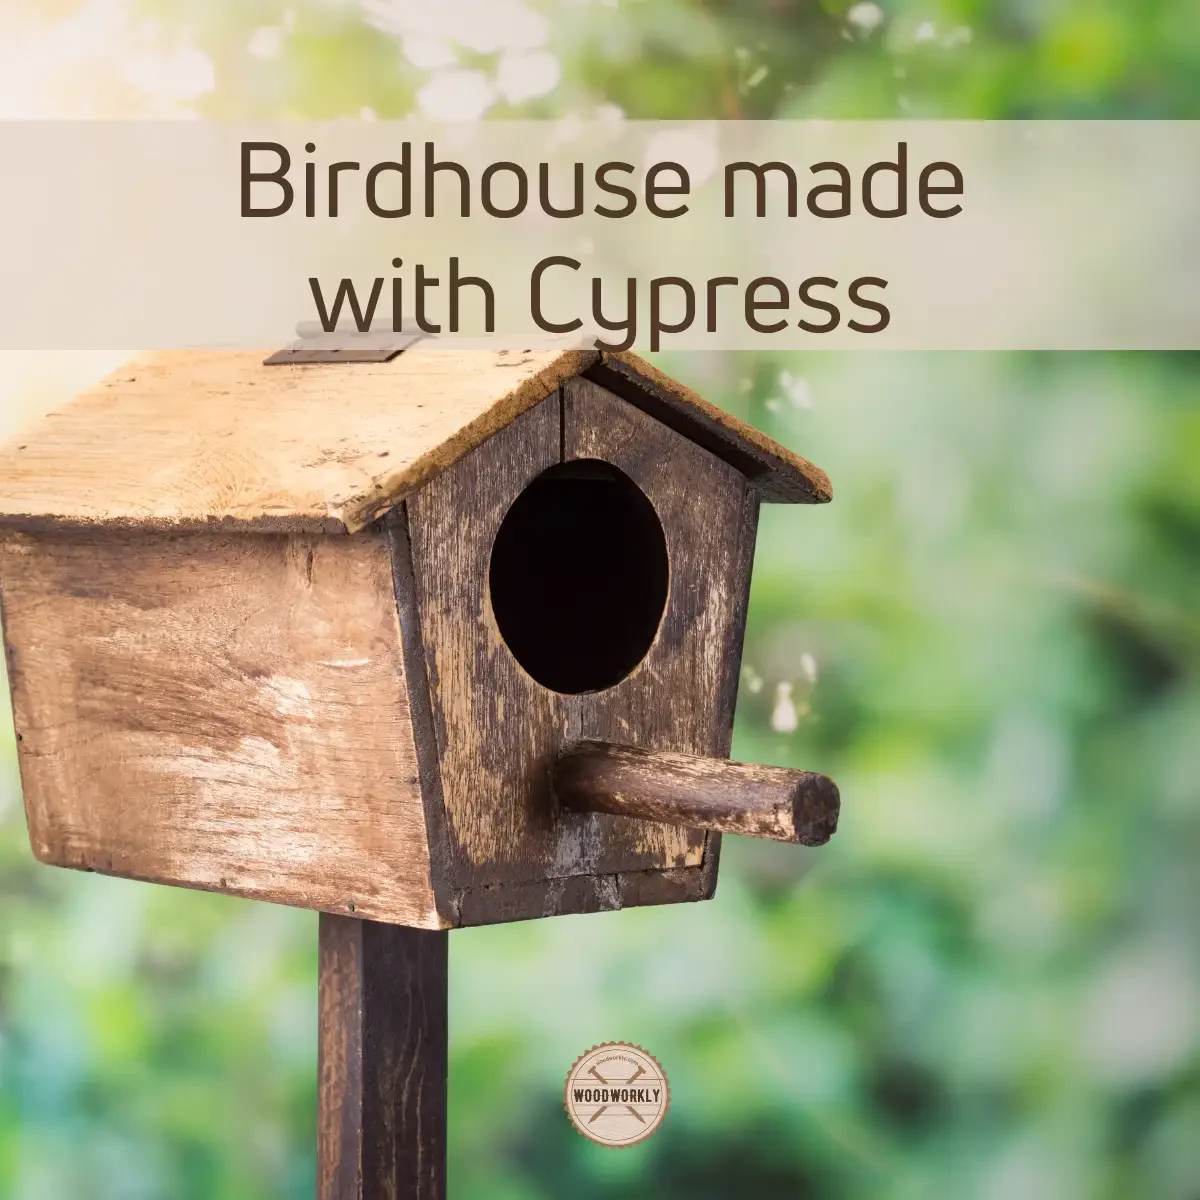 Birdhouse made with Cypress